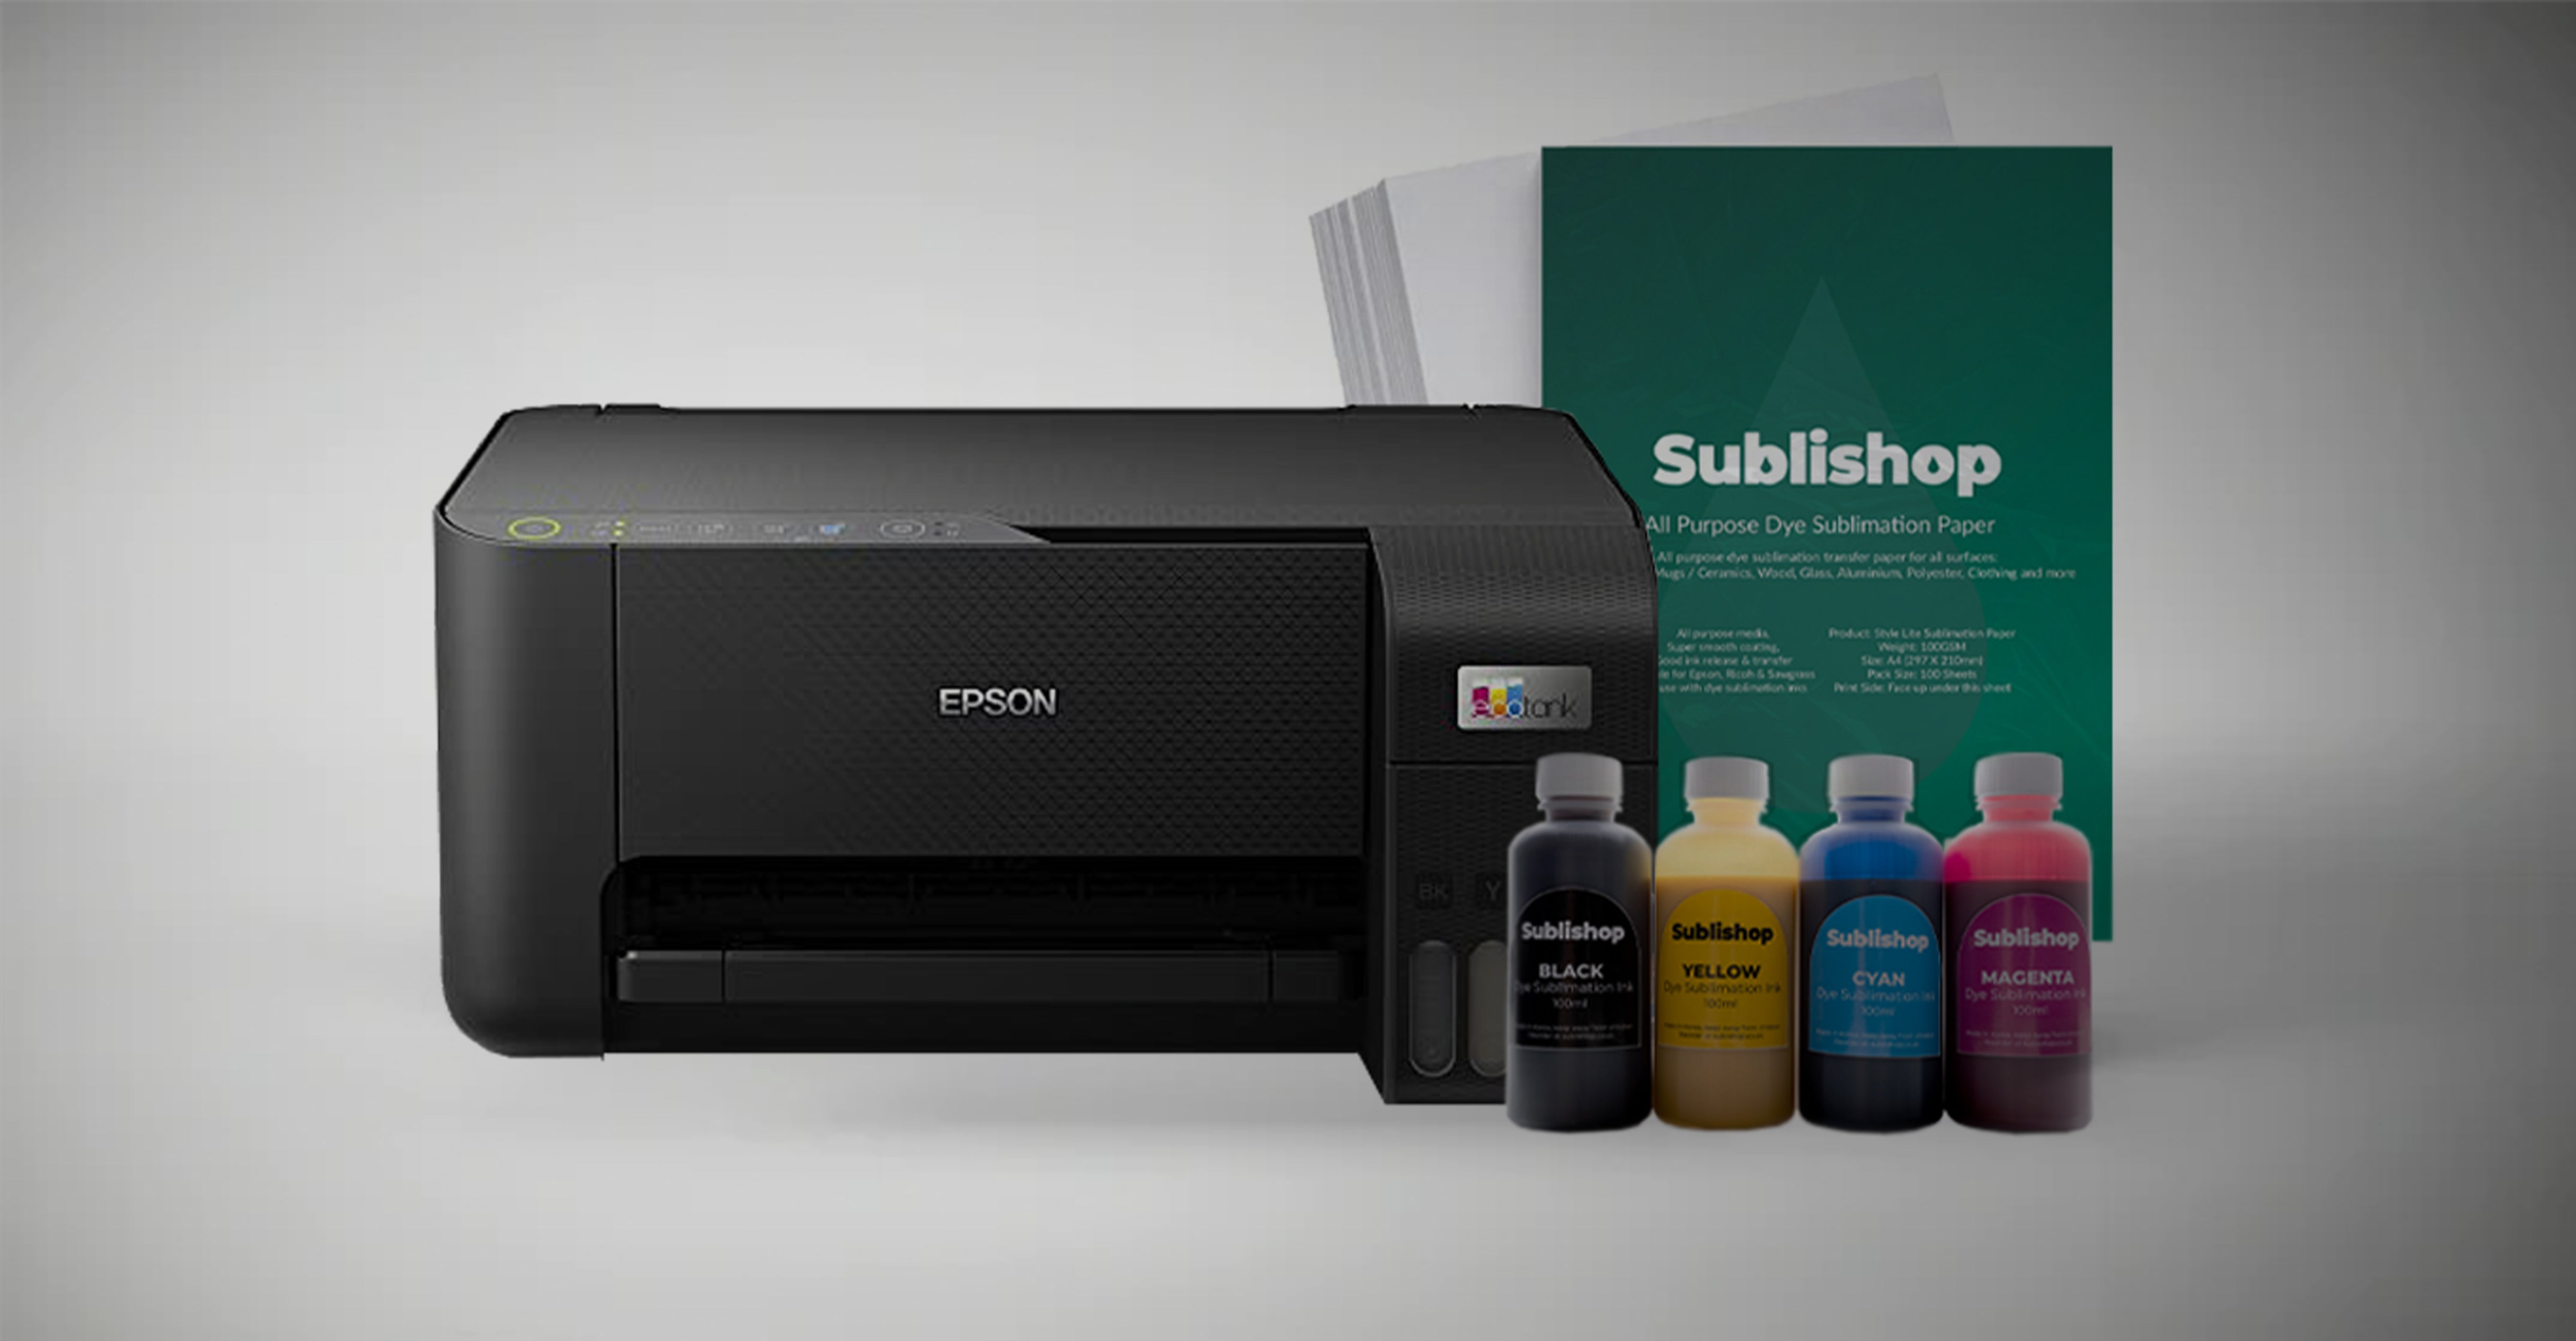 How To Turn A Epson Printer Into A Sublimation Printer